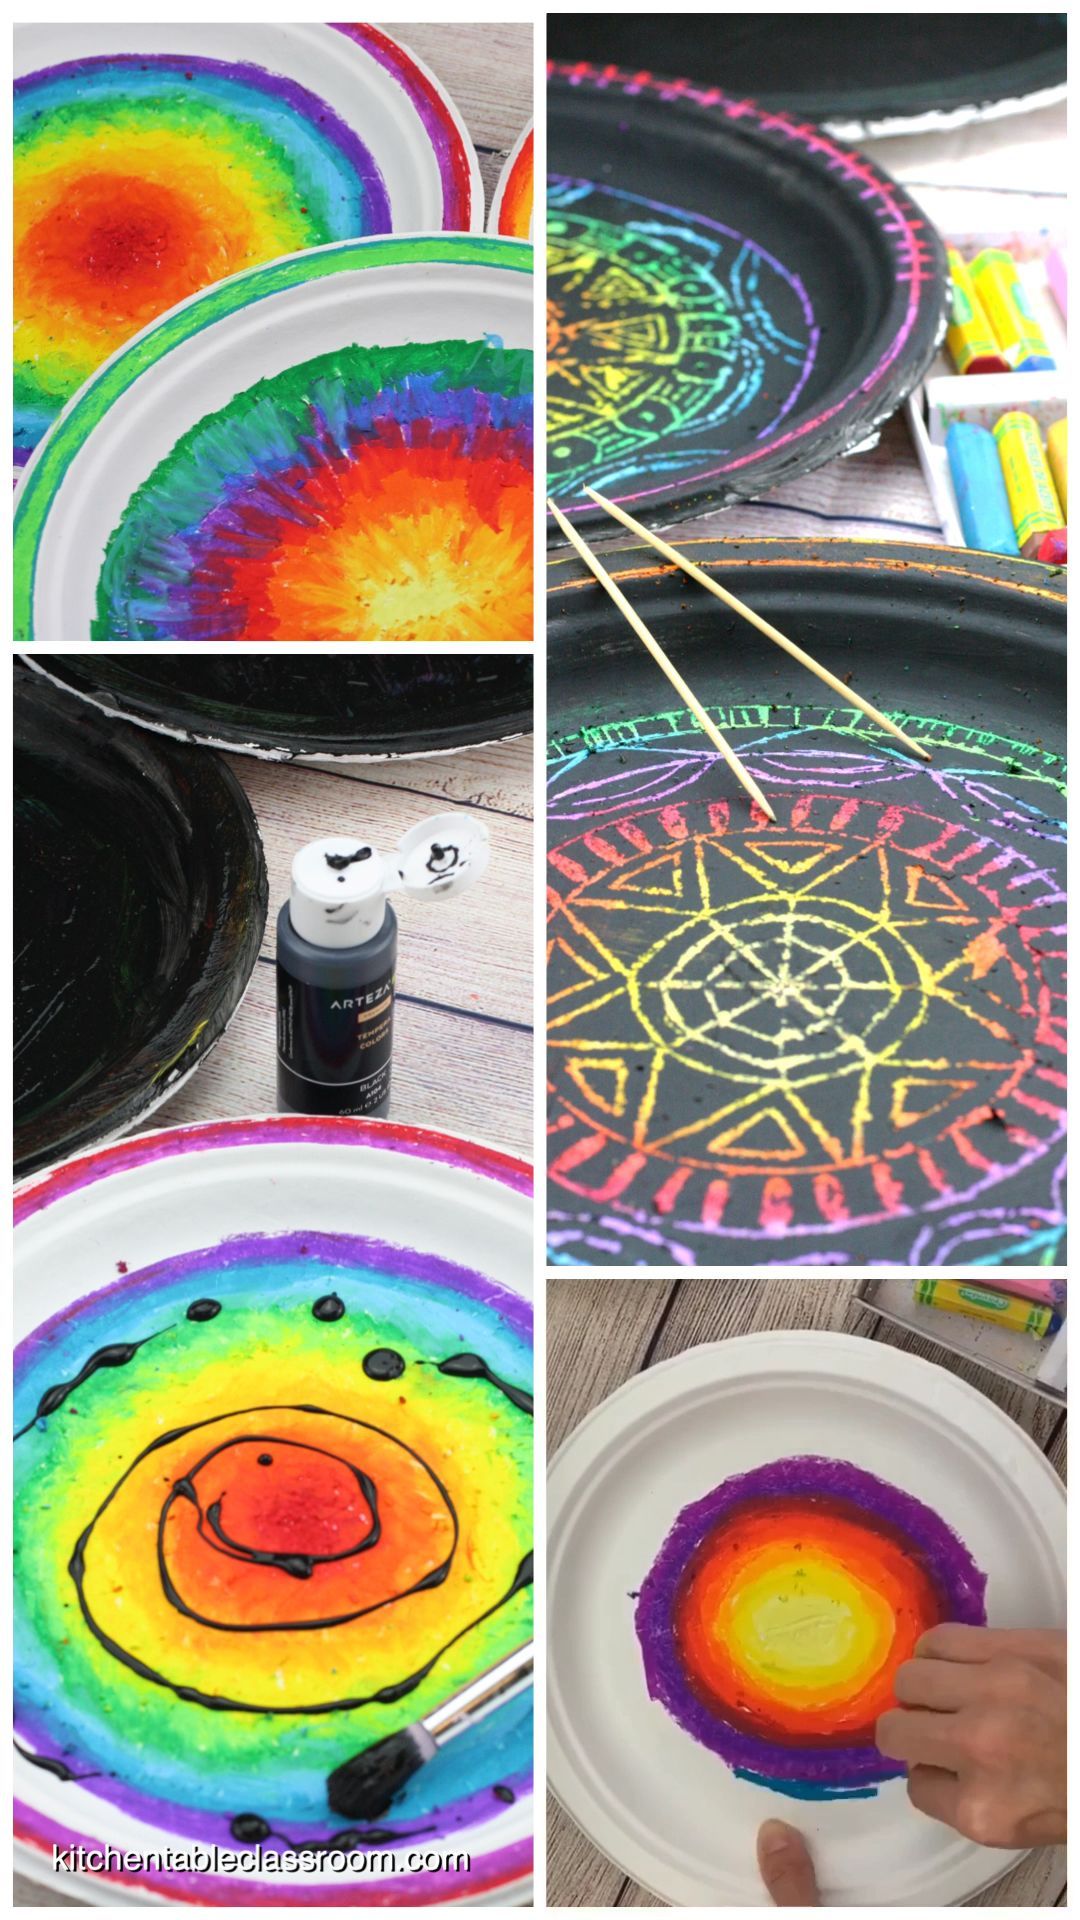 DIY Scratch Art- Colorful Paper Plate Mandalas - The Kitchen Table Classroom -   19 diy projects Cute fun ideas